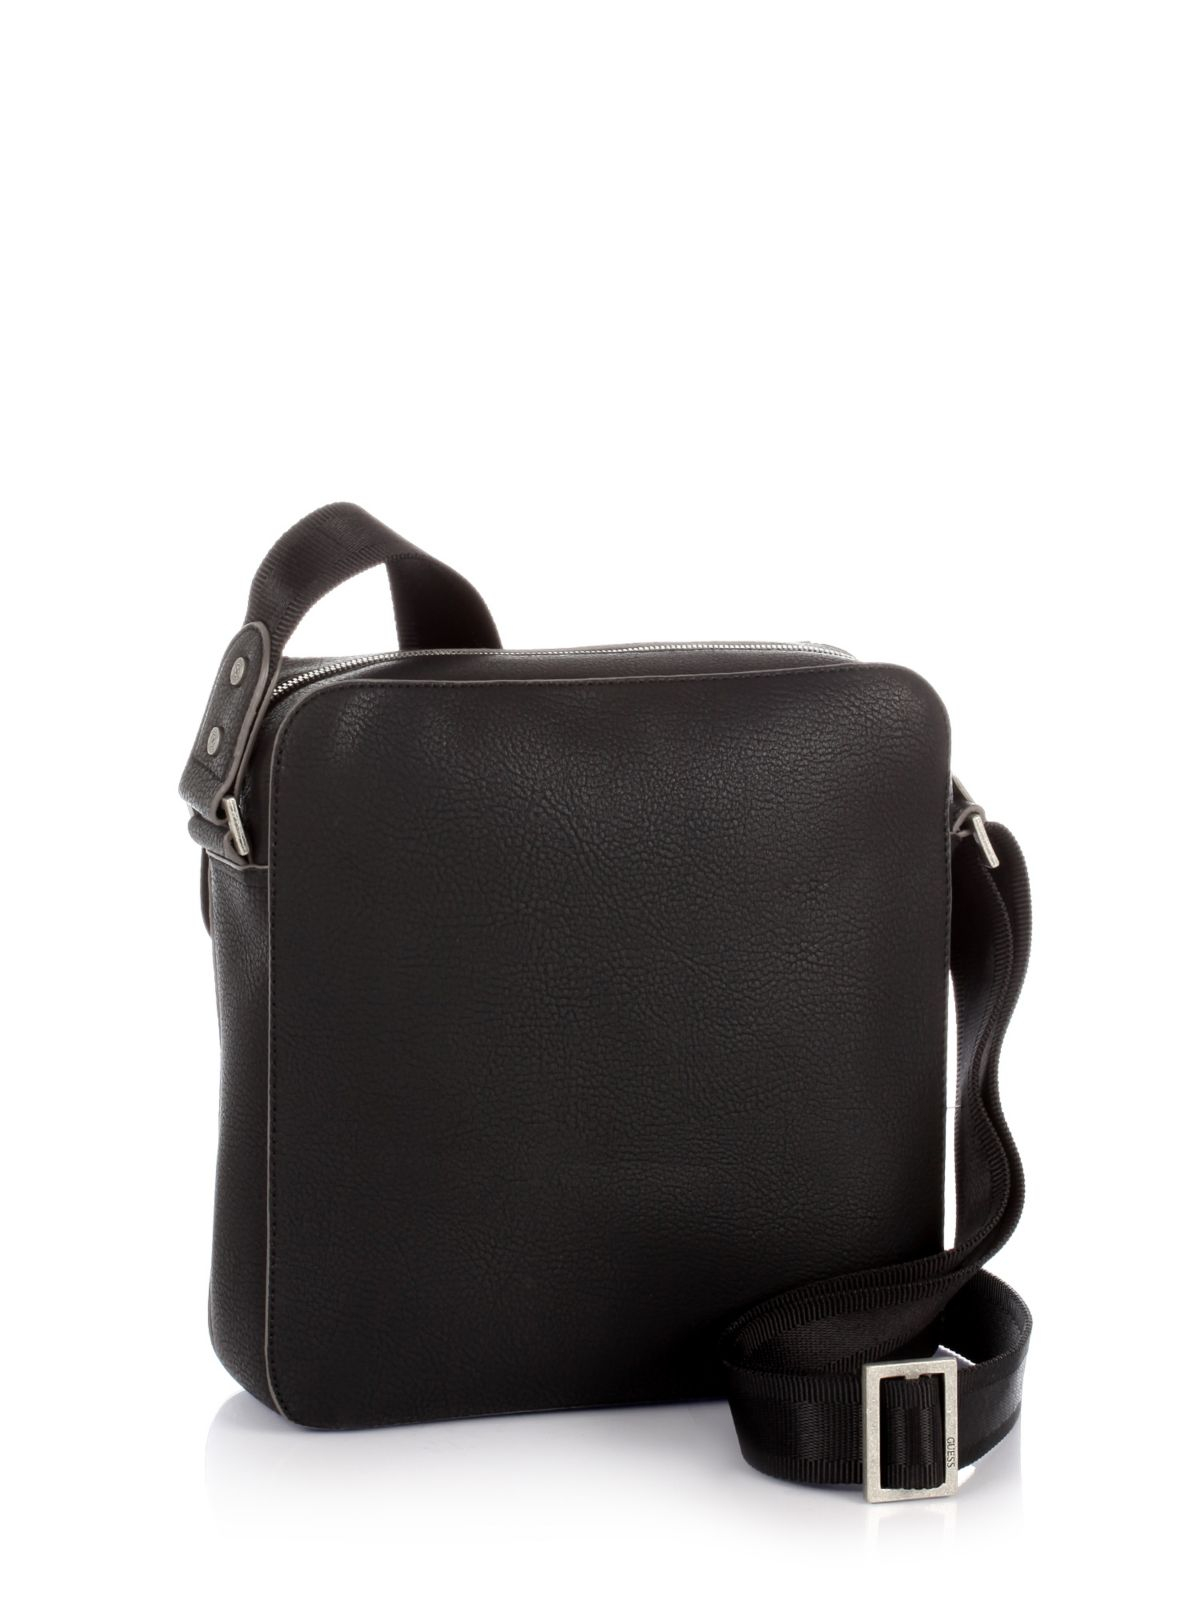 Guess Contemporary Elegance Crossbody with Flap Bag in Black for Men